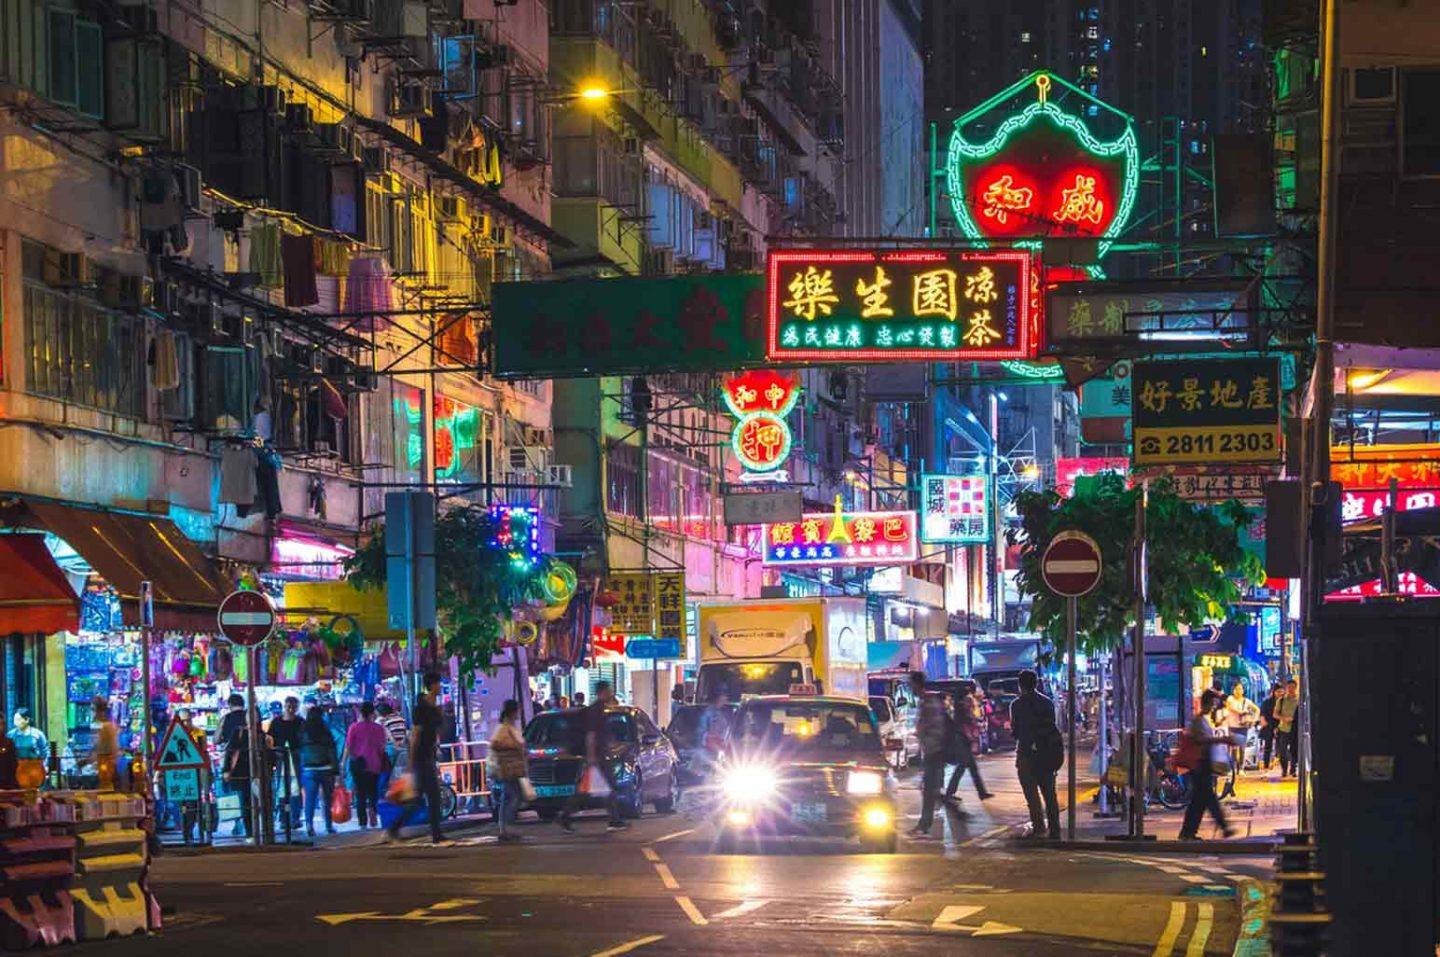 Travel Tips for an Amazing Adventure in Hong Kong